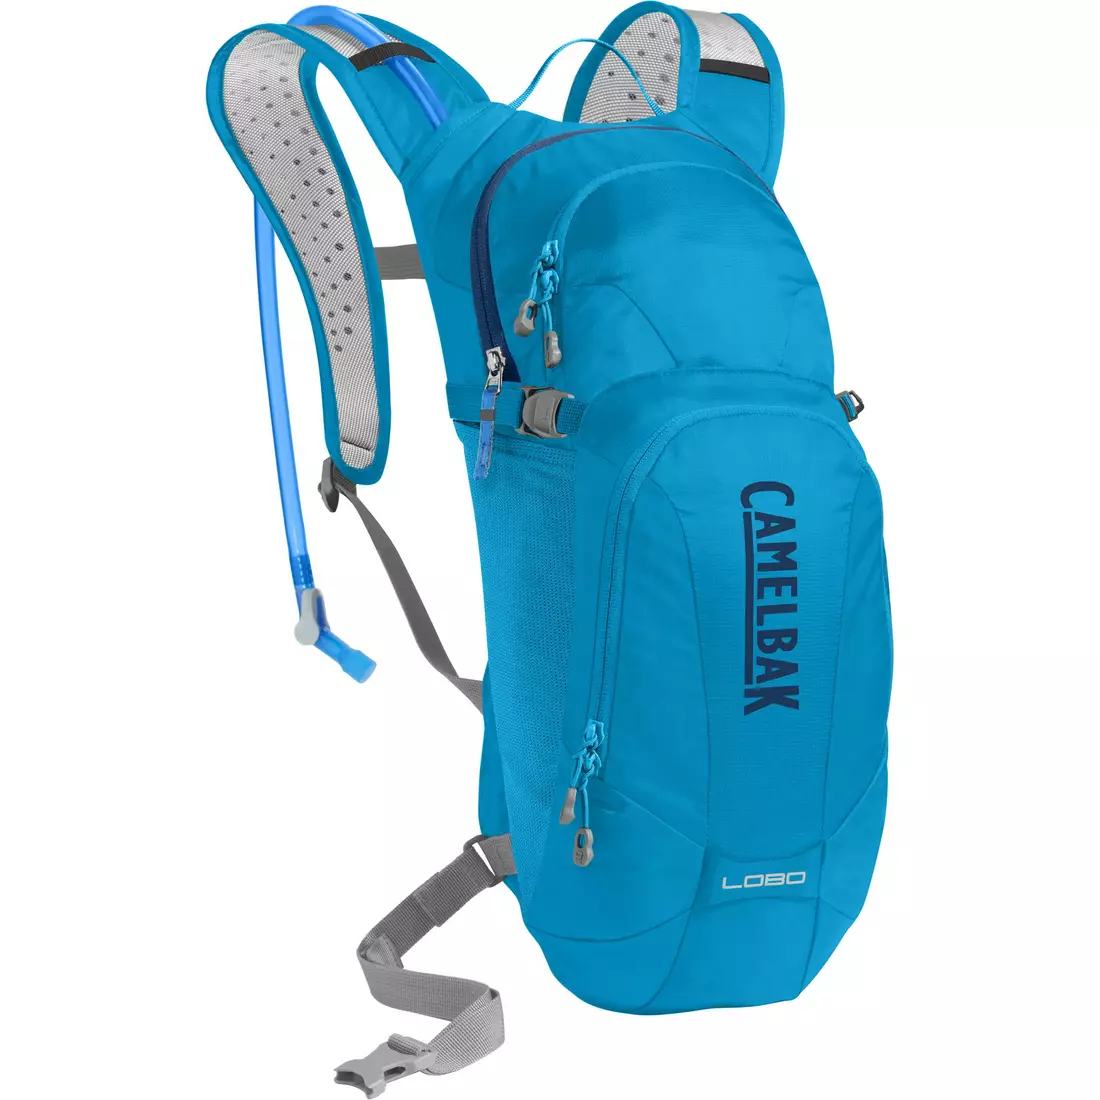 Camelbak SS18 backpack with water bladder Lobo 100oz/ 3L Atomic Blue/Pitch Blue 1118401900